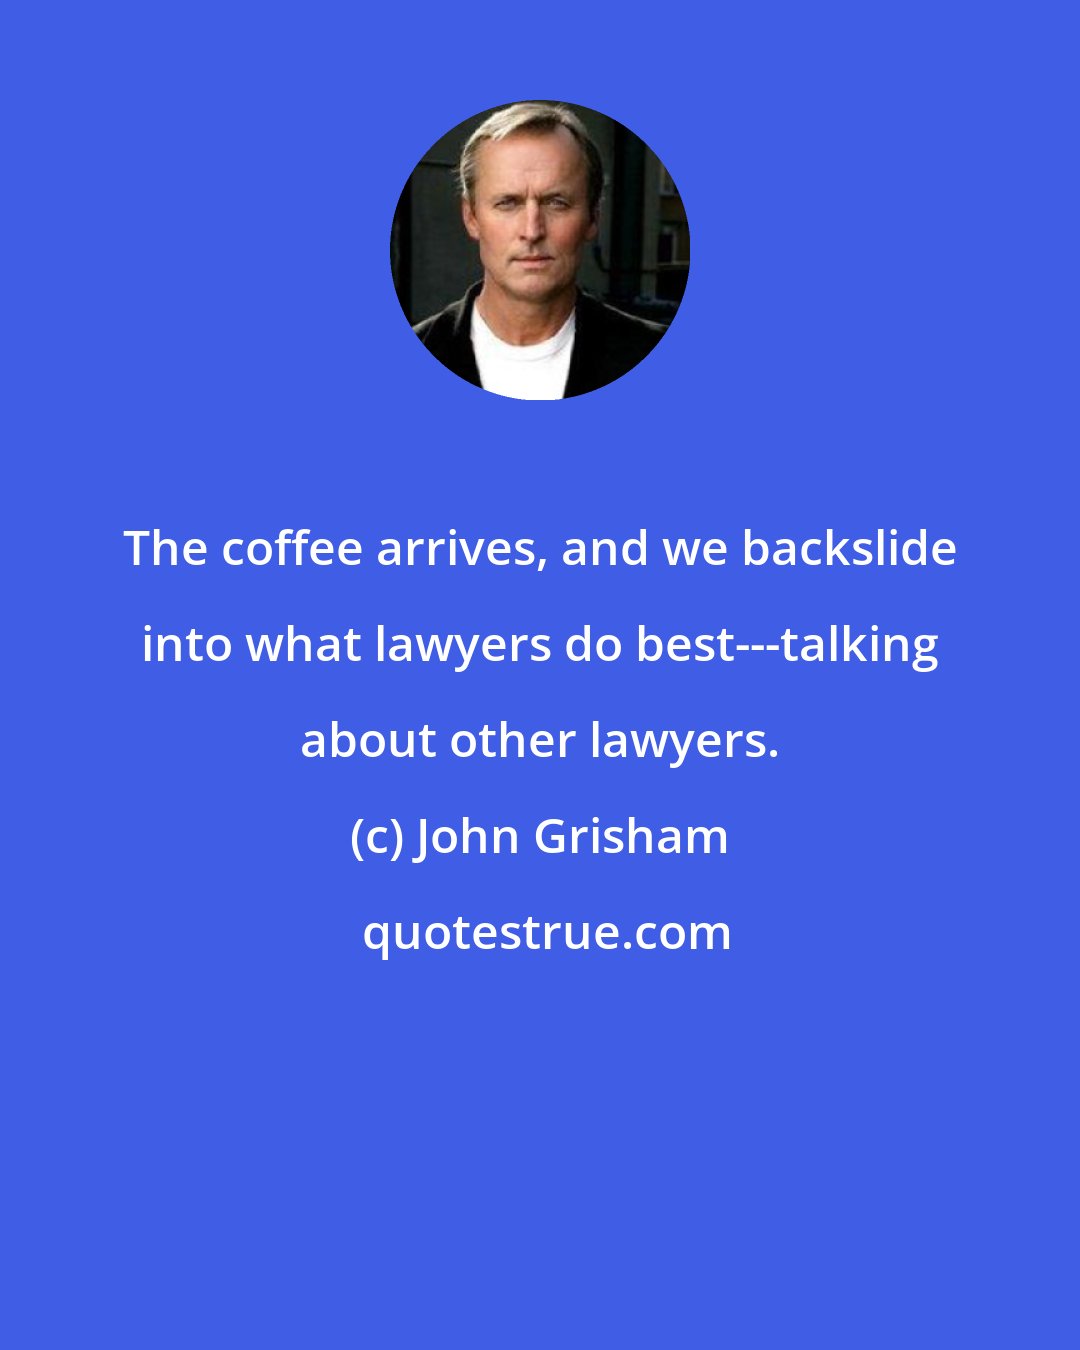 John Grisham: The coffee arrives, and we backslide into what lawyers do best---talking about other lawyers.